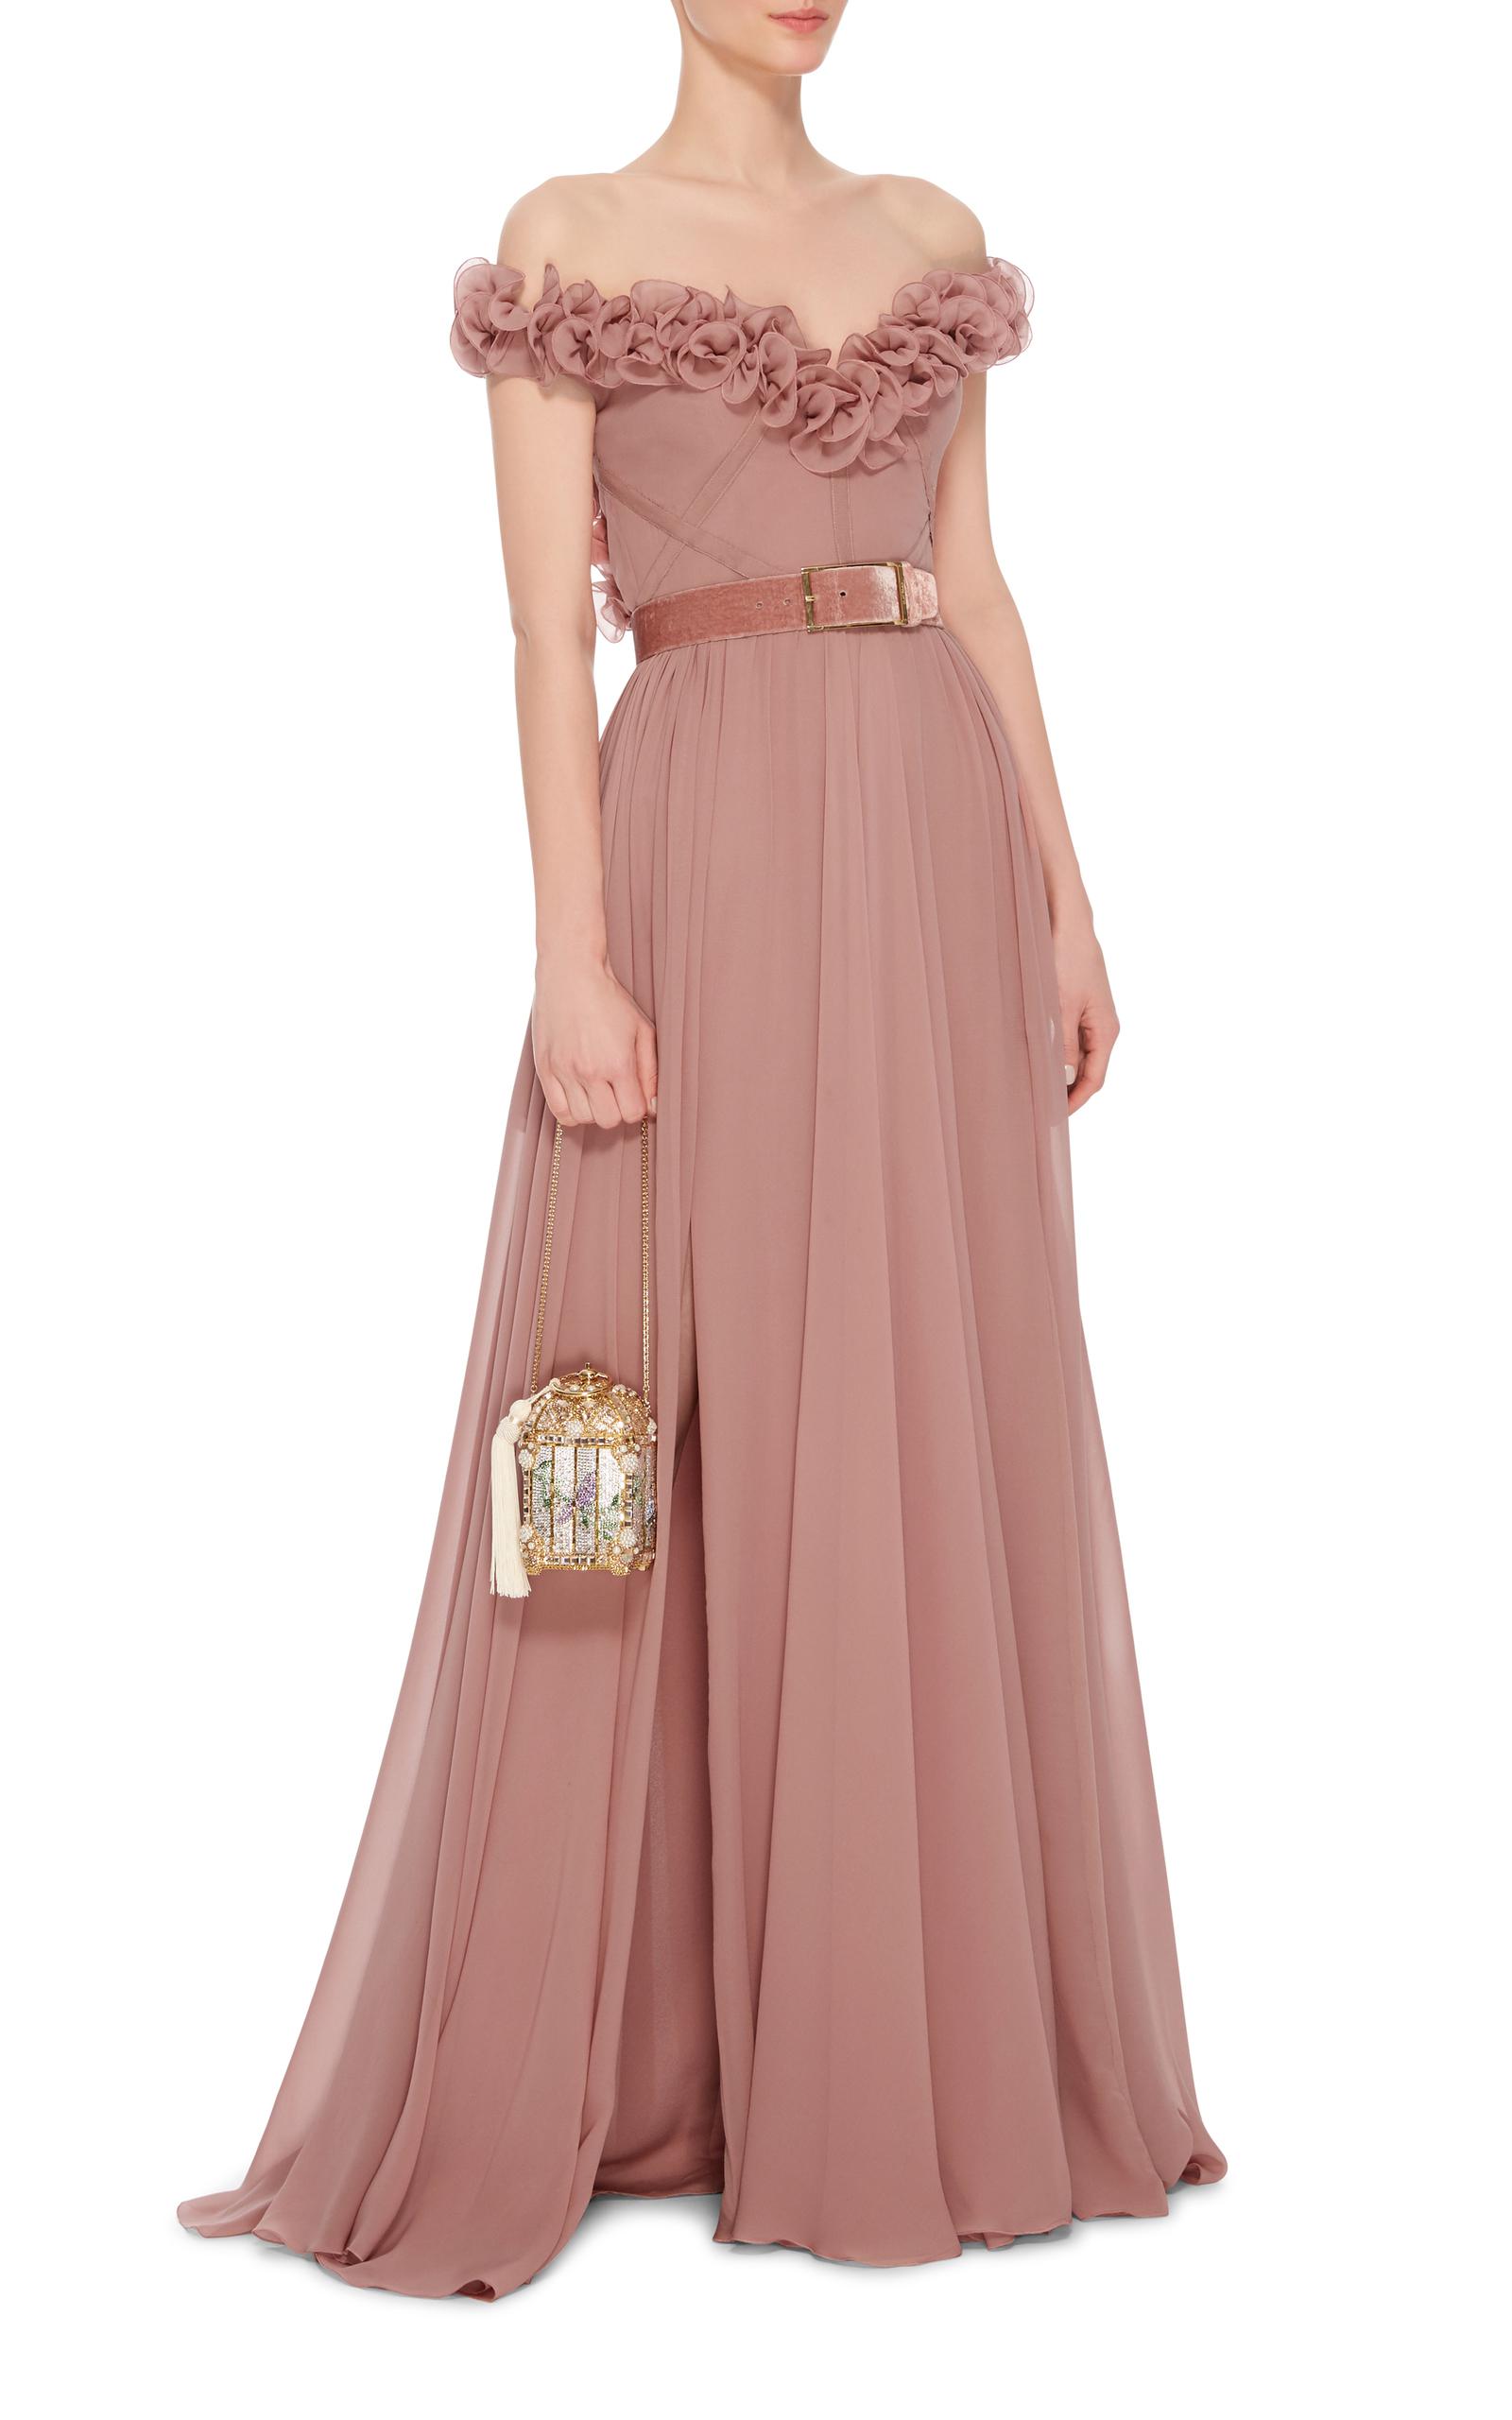 Lyst - Elie Saab Sleeveless Ruffled Gown in Pink